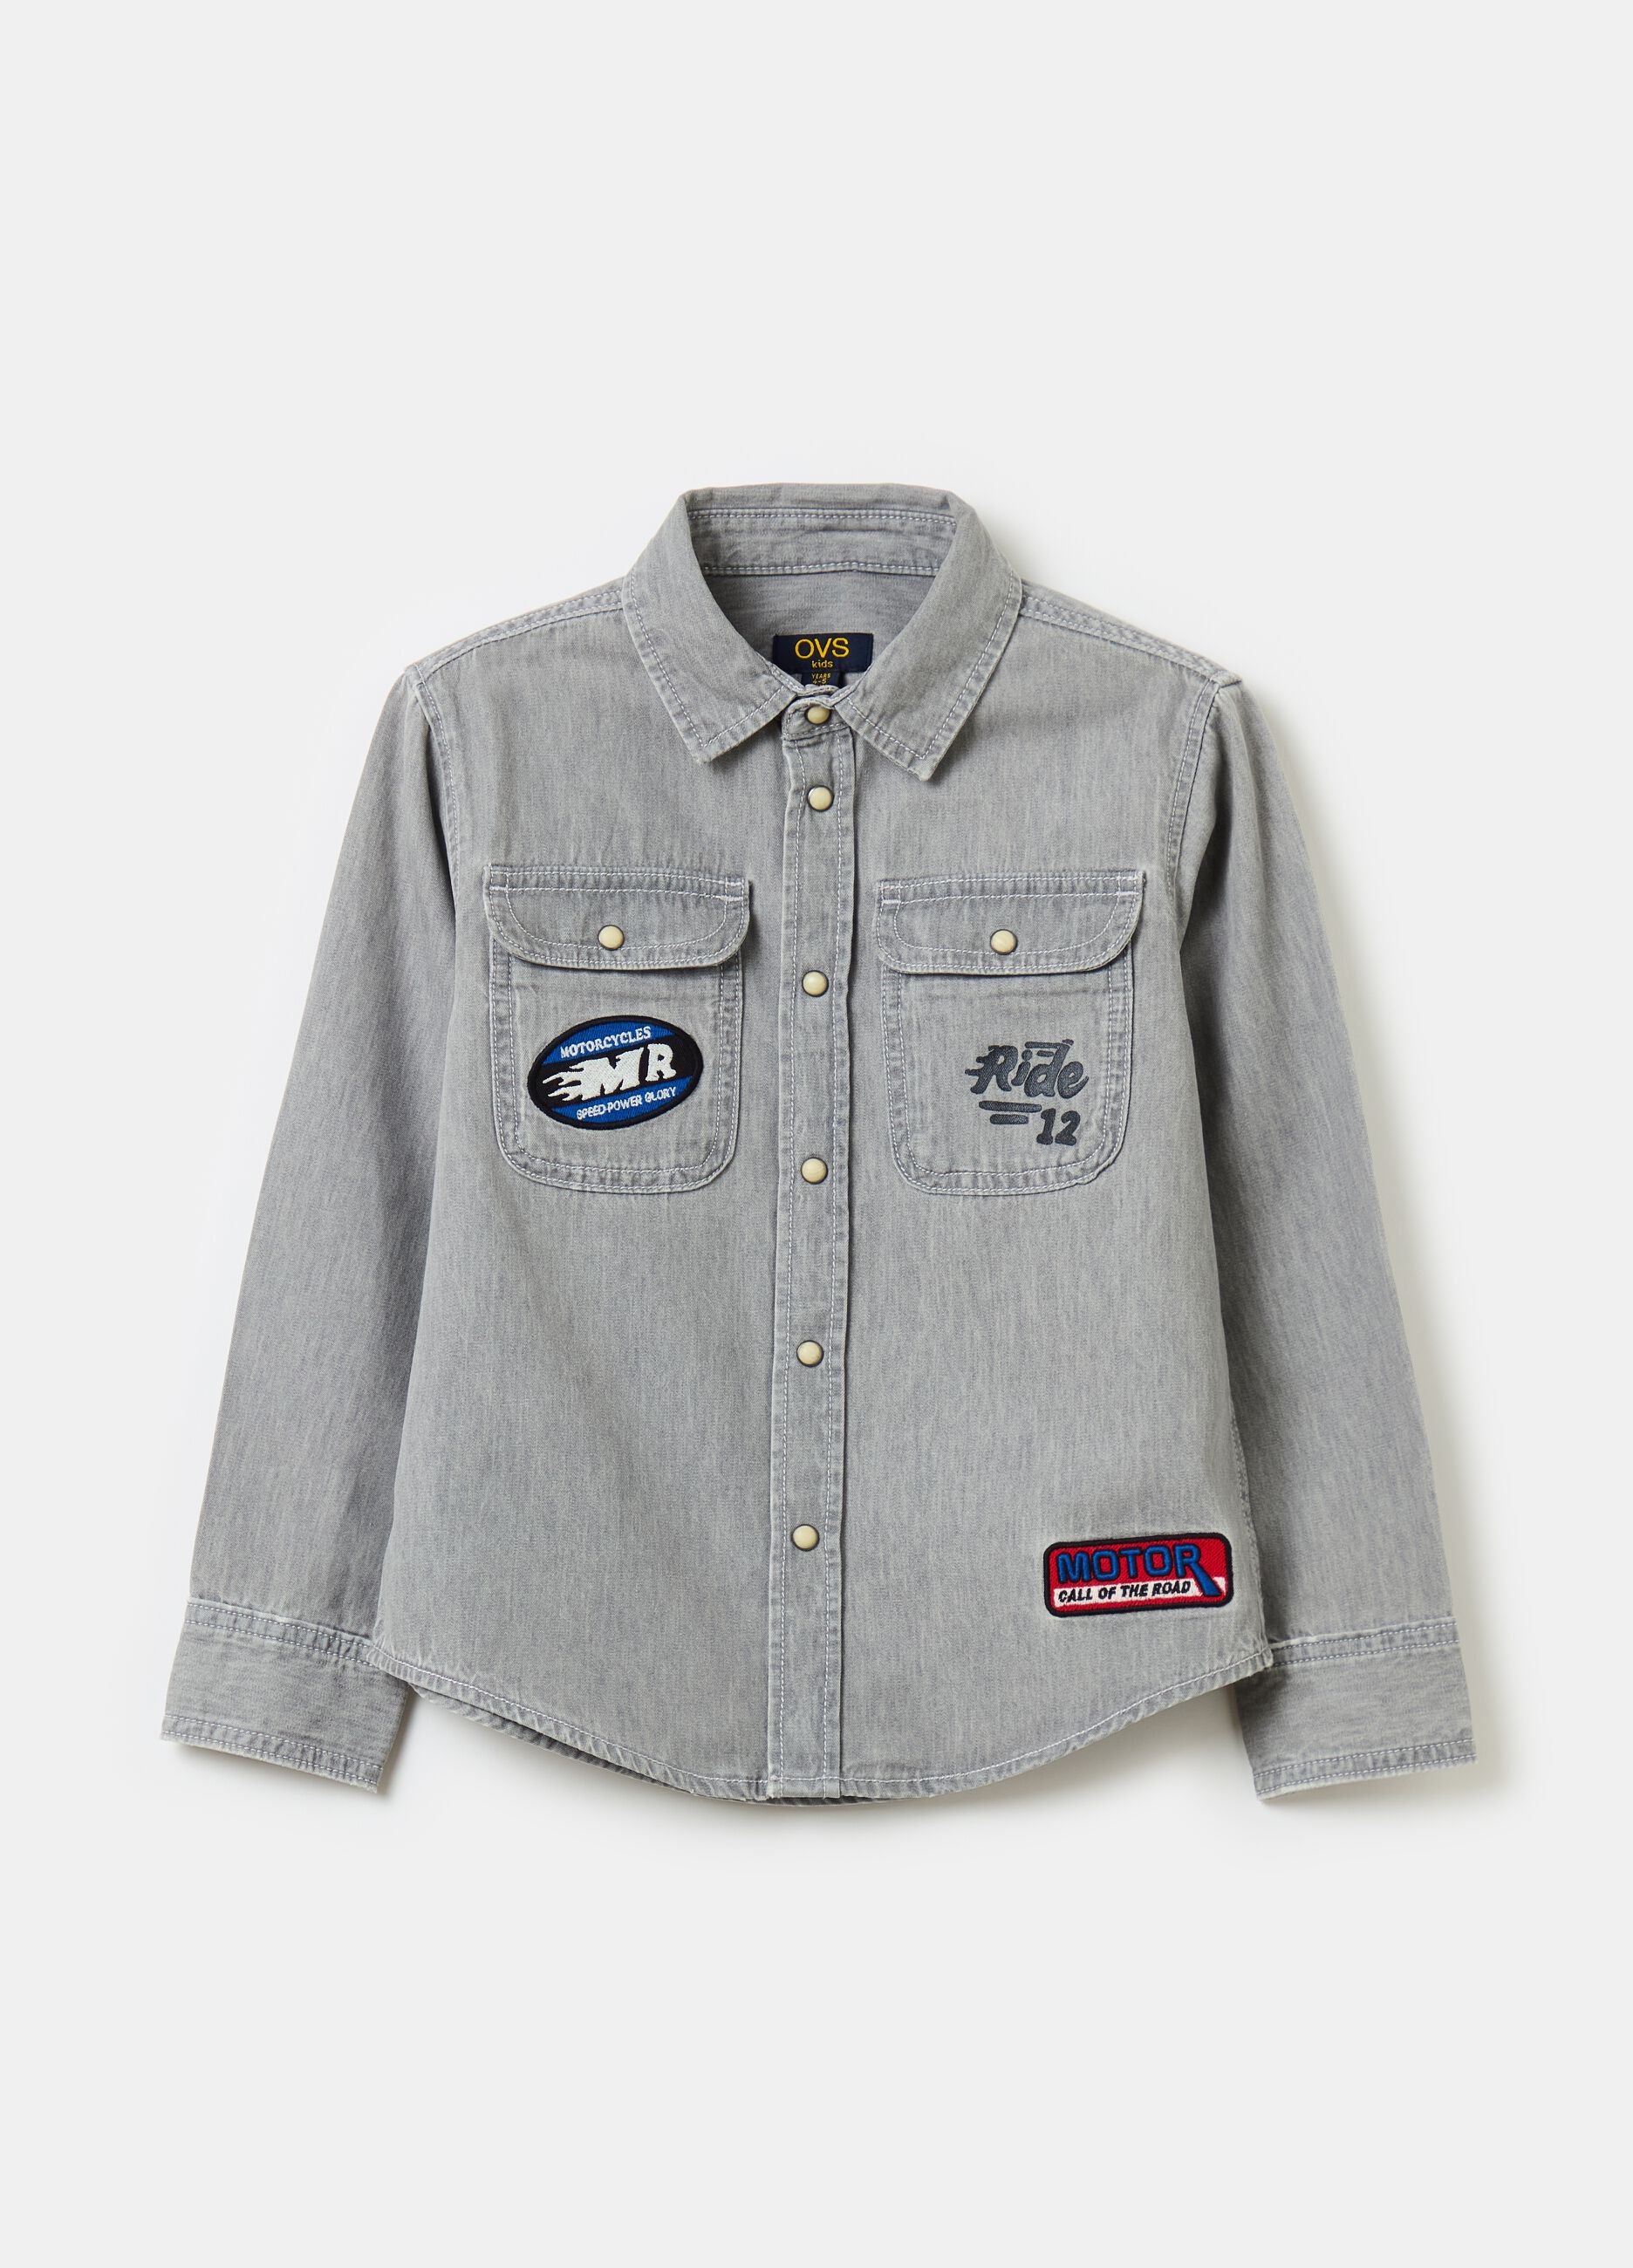 Denim shirt with patch and motorcycle embroidery